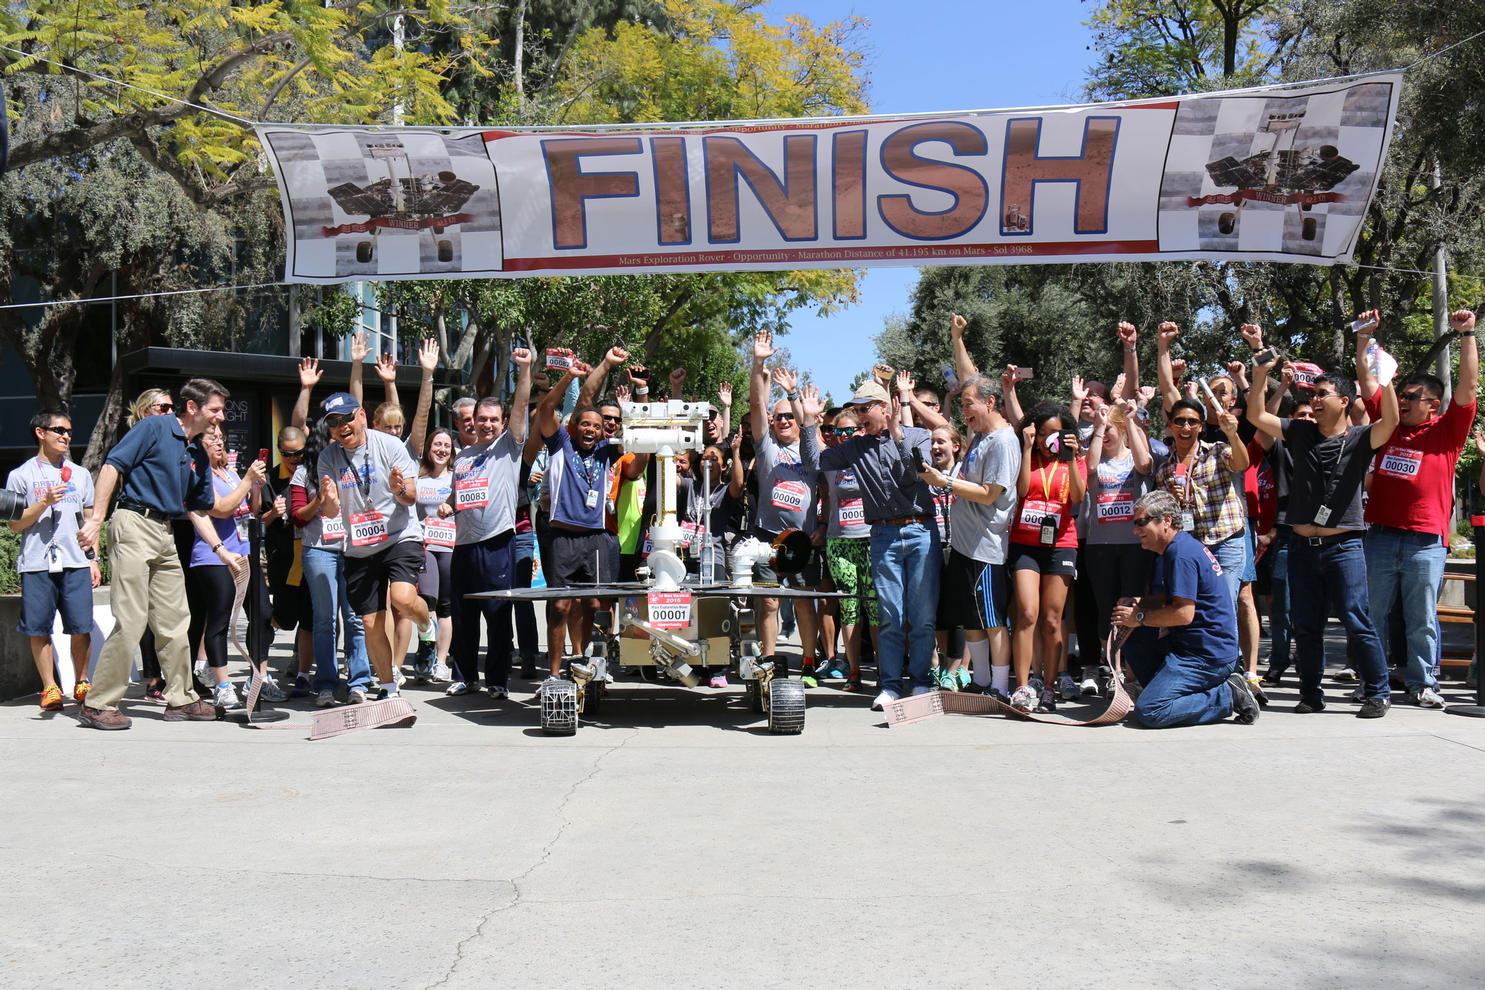 JPL employees show their support for the Opportunity rover's marathon-run on Mars, by running a marathon-length relay of their own on April 9, 2015.